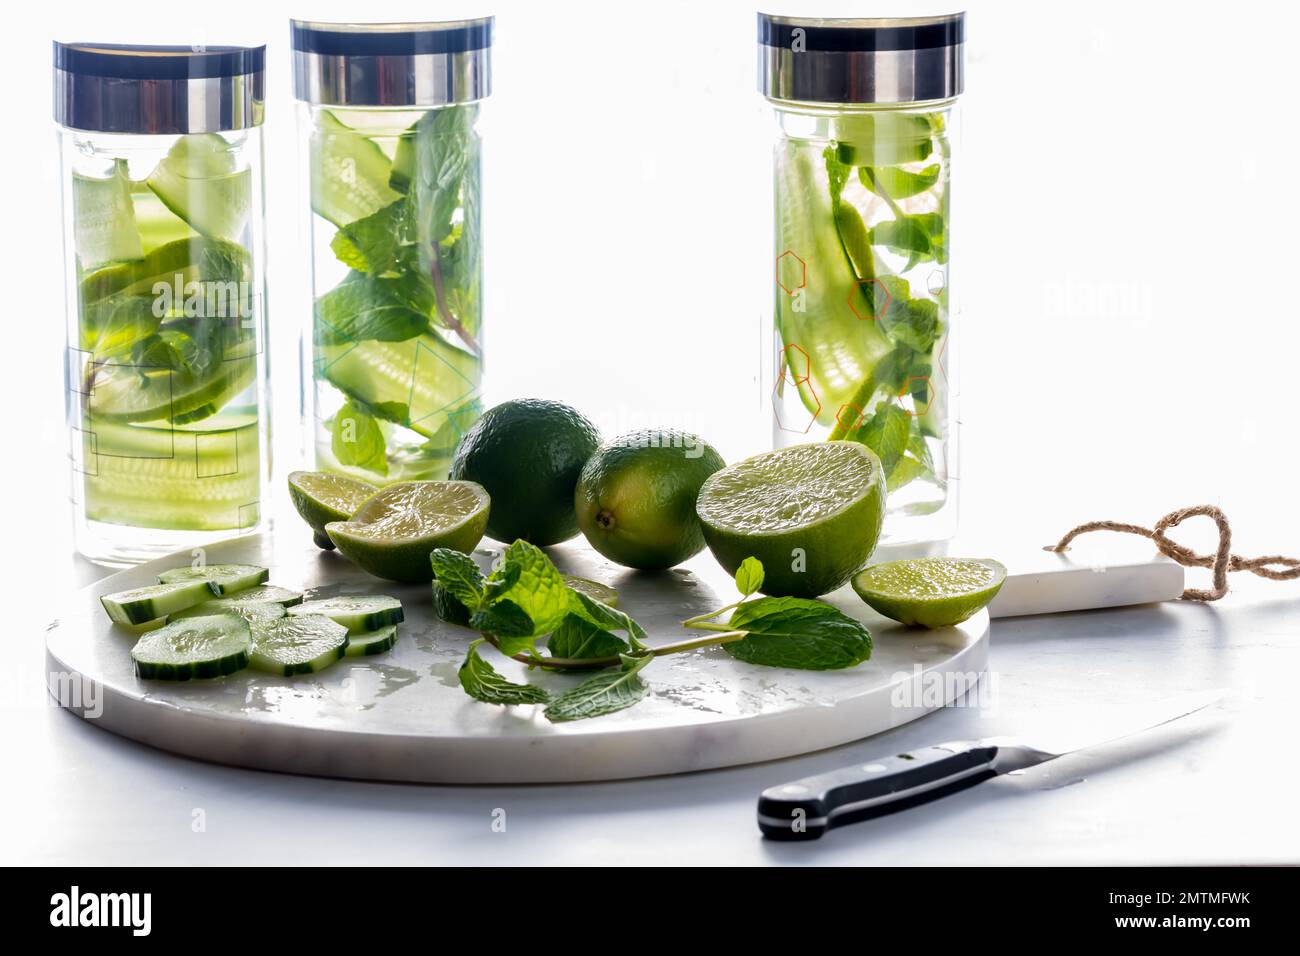 Glass bottles of cucumber water with ingredients on a marble slab in front. Stock Photo